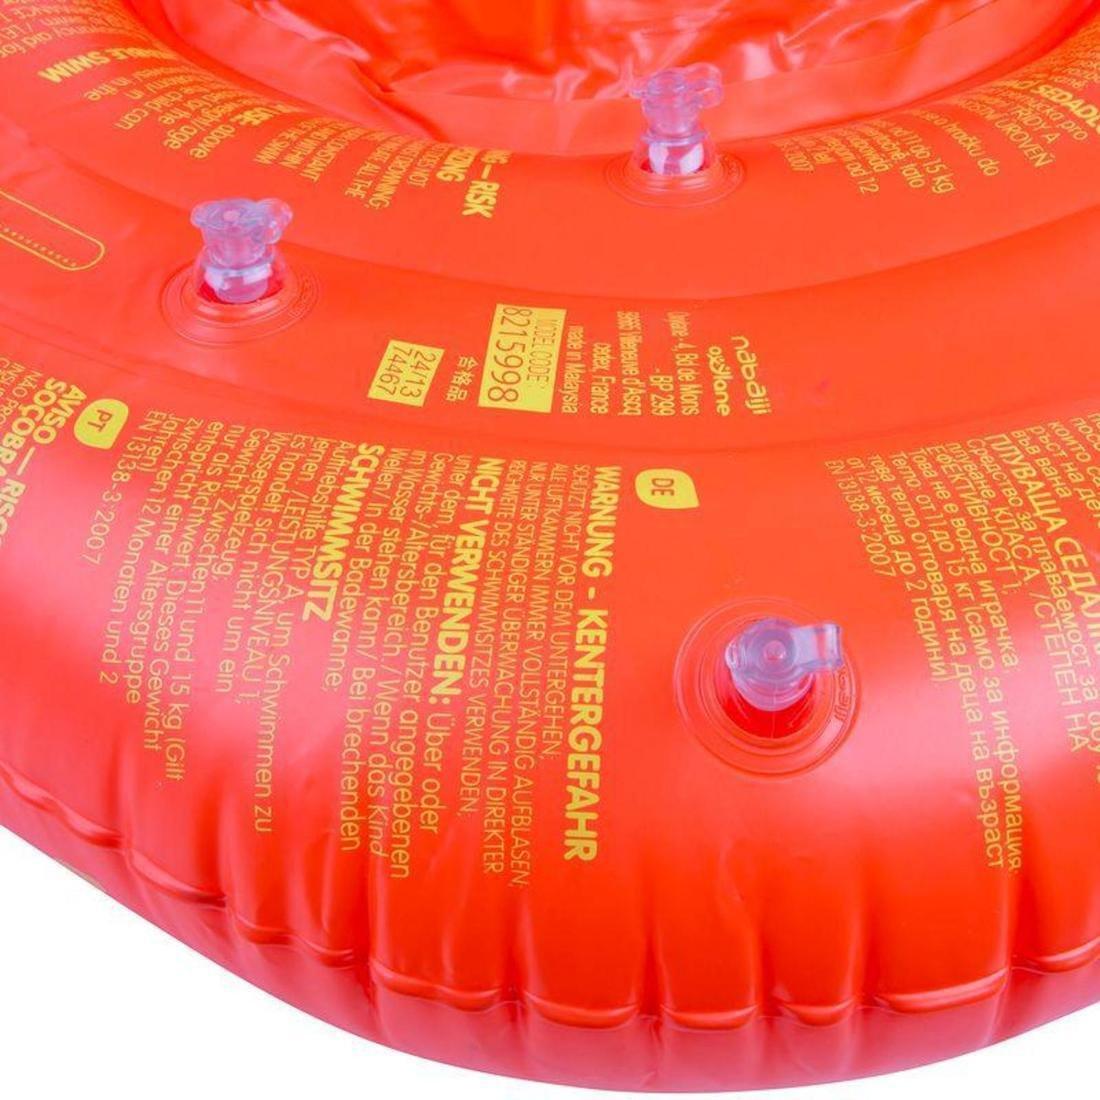 NABAIJI - Baby's orange inflatable swim ring with seat for infants weighing  11- 15 kg